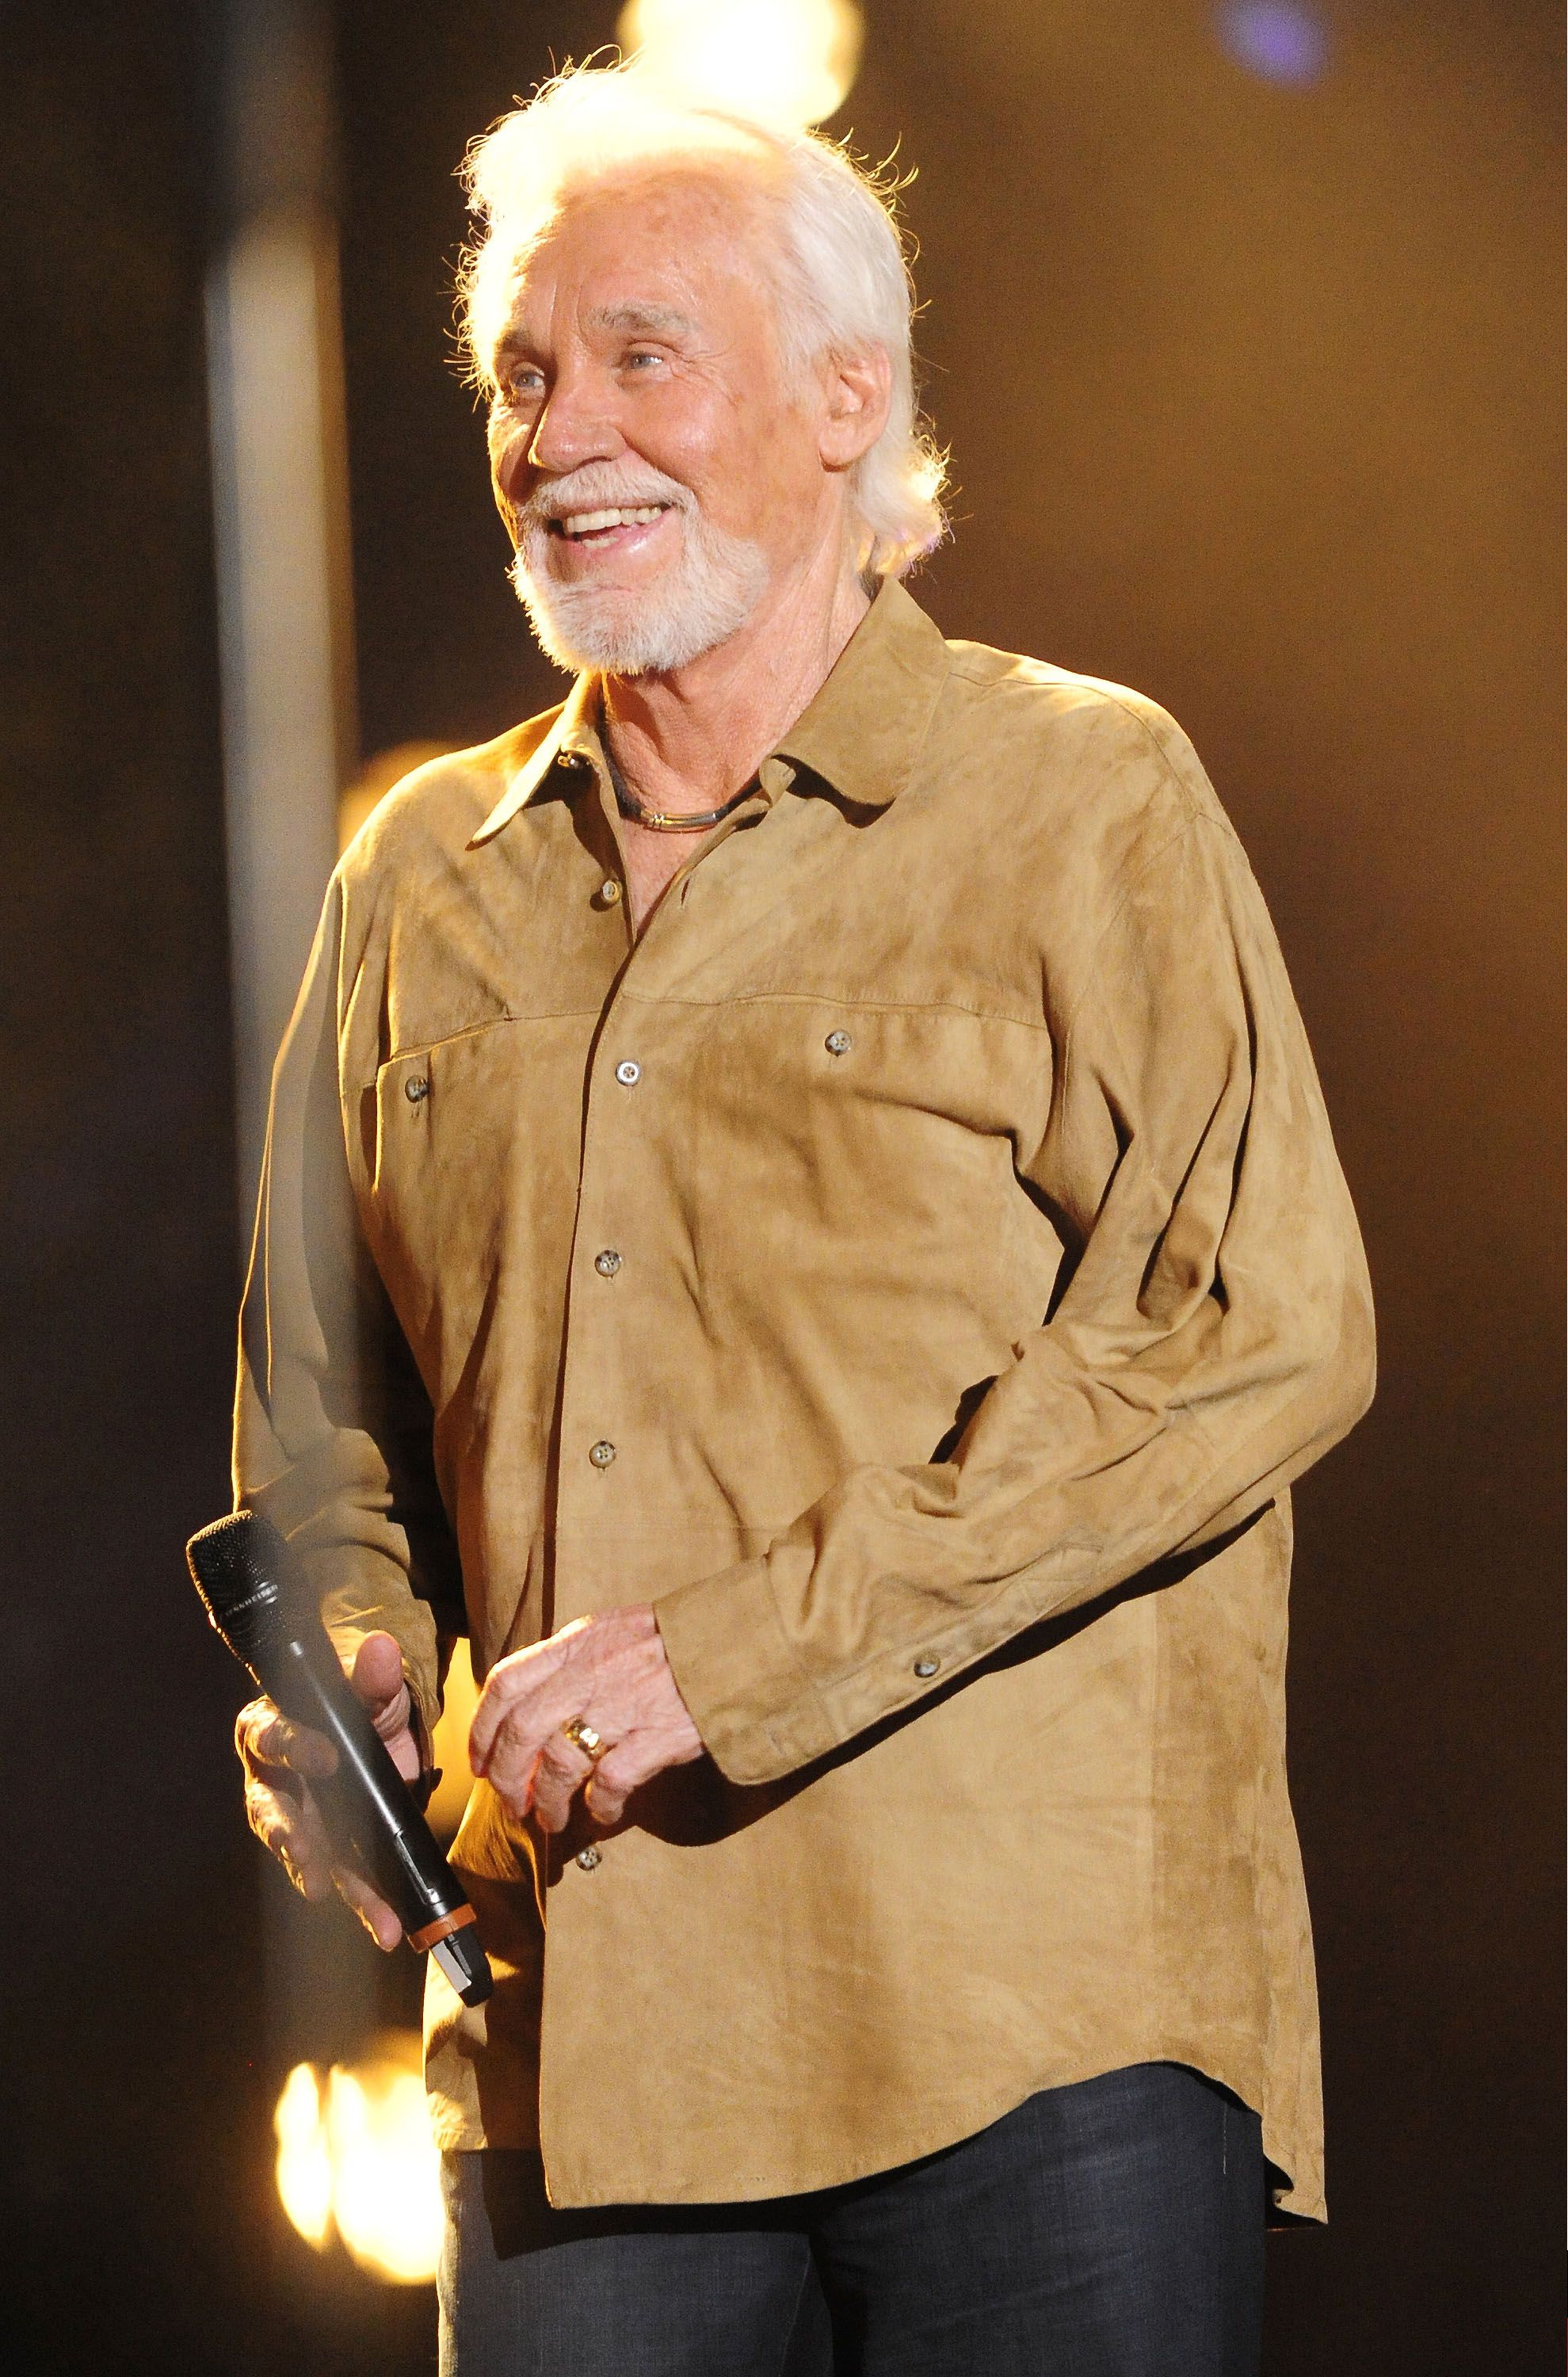 a&e biography kenny rogers